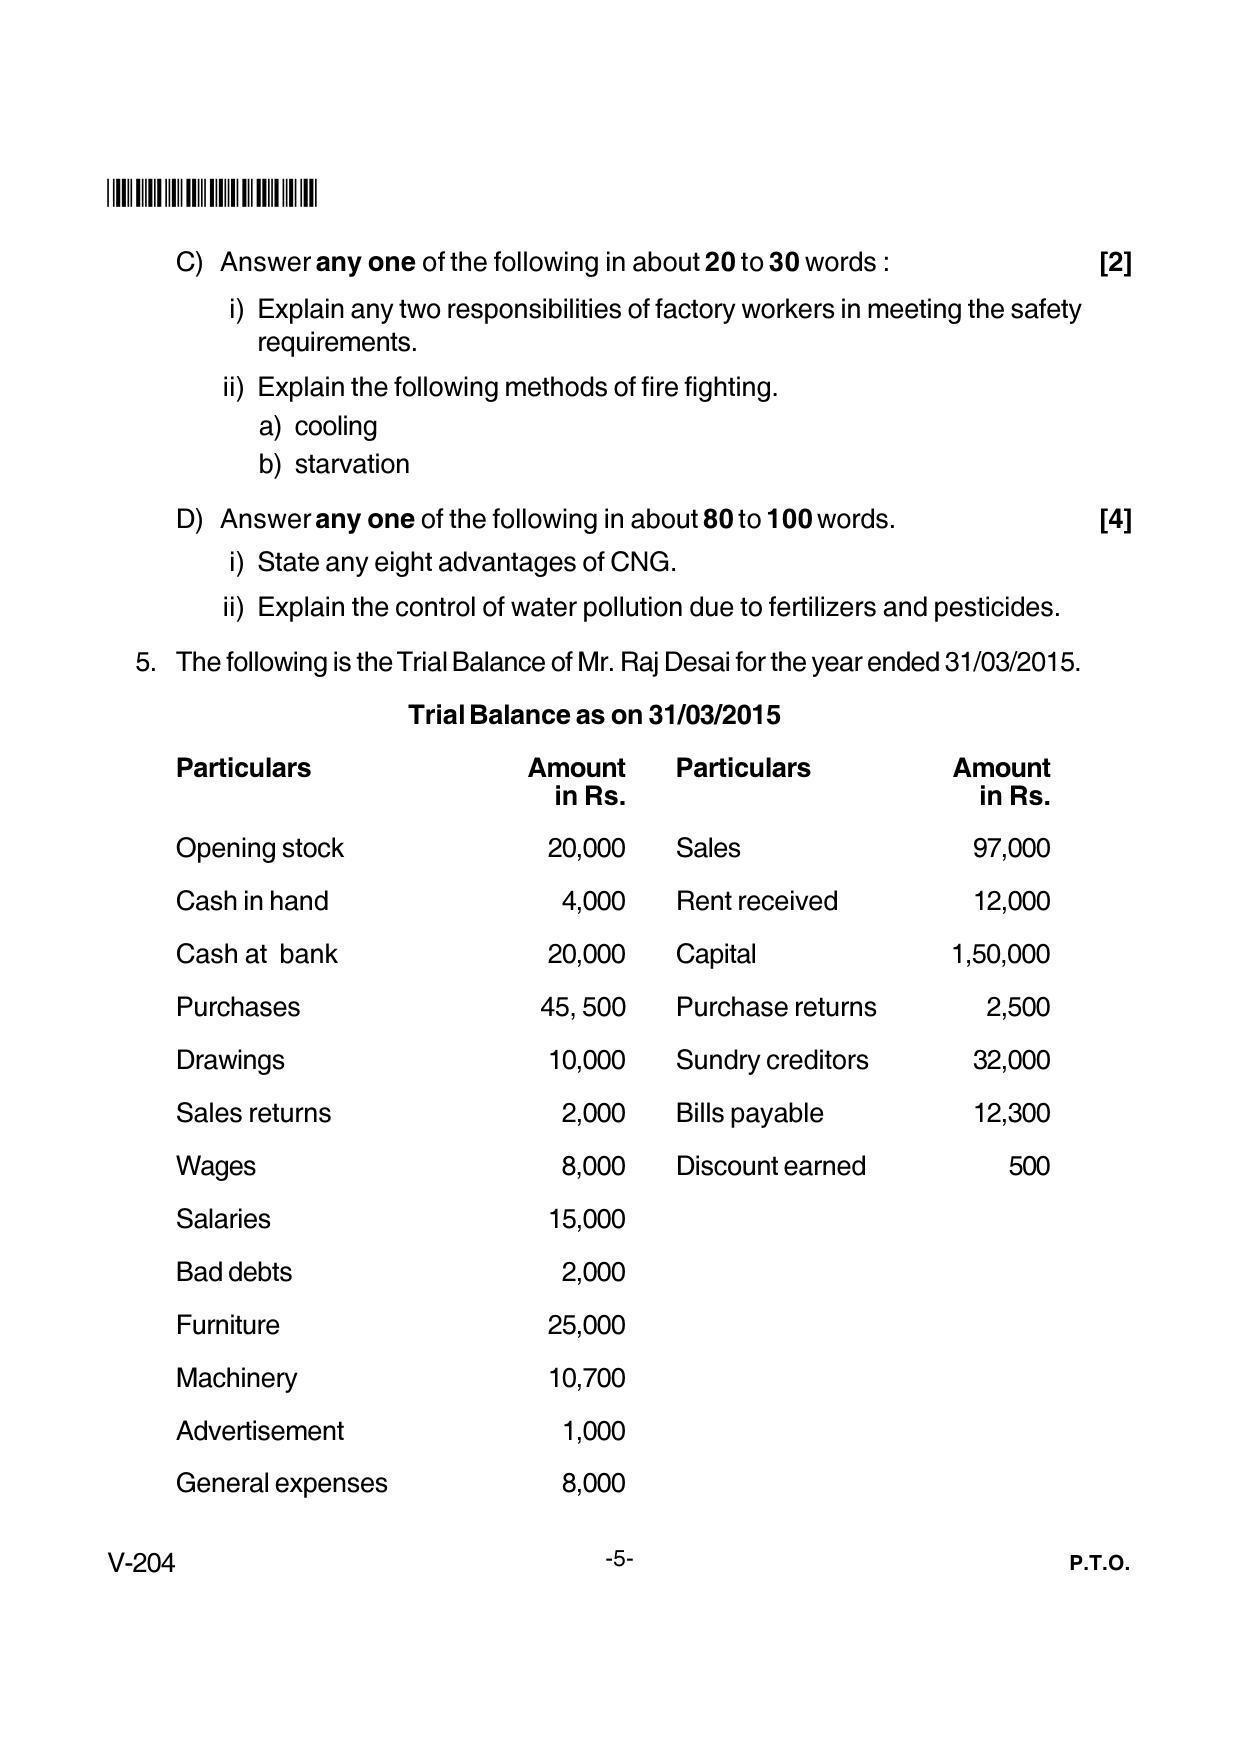 Goa Board Class 12 General Foundation Course (CWSN)  Voc 204 Cwsn (June 2018) Question Paper - Page 5